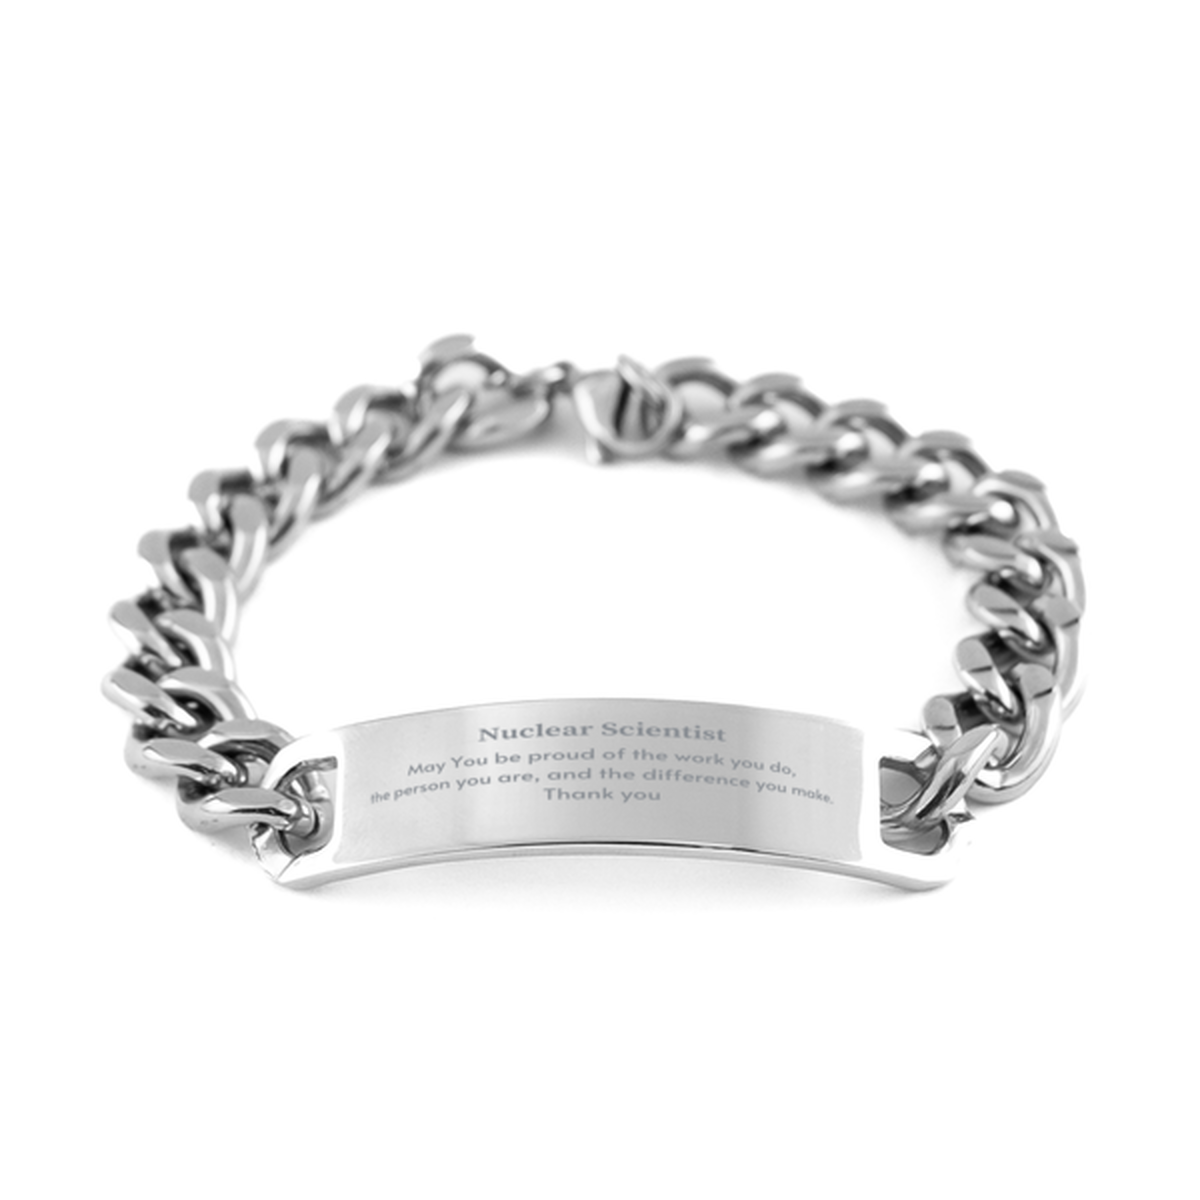 Heartwarming Cuban Chain Stainless Steel Bracelet Retirement Coworkers Gifts for Nuclear Scientist, Nuclear Scientist May You be proud of the work you do, the person you are Gifts for Boss Men Women Friends